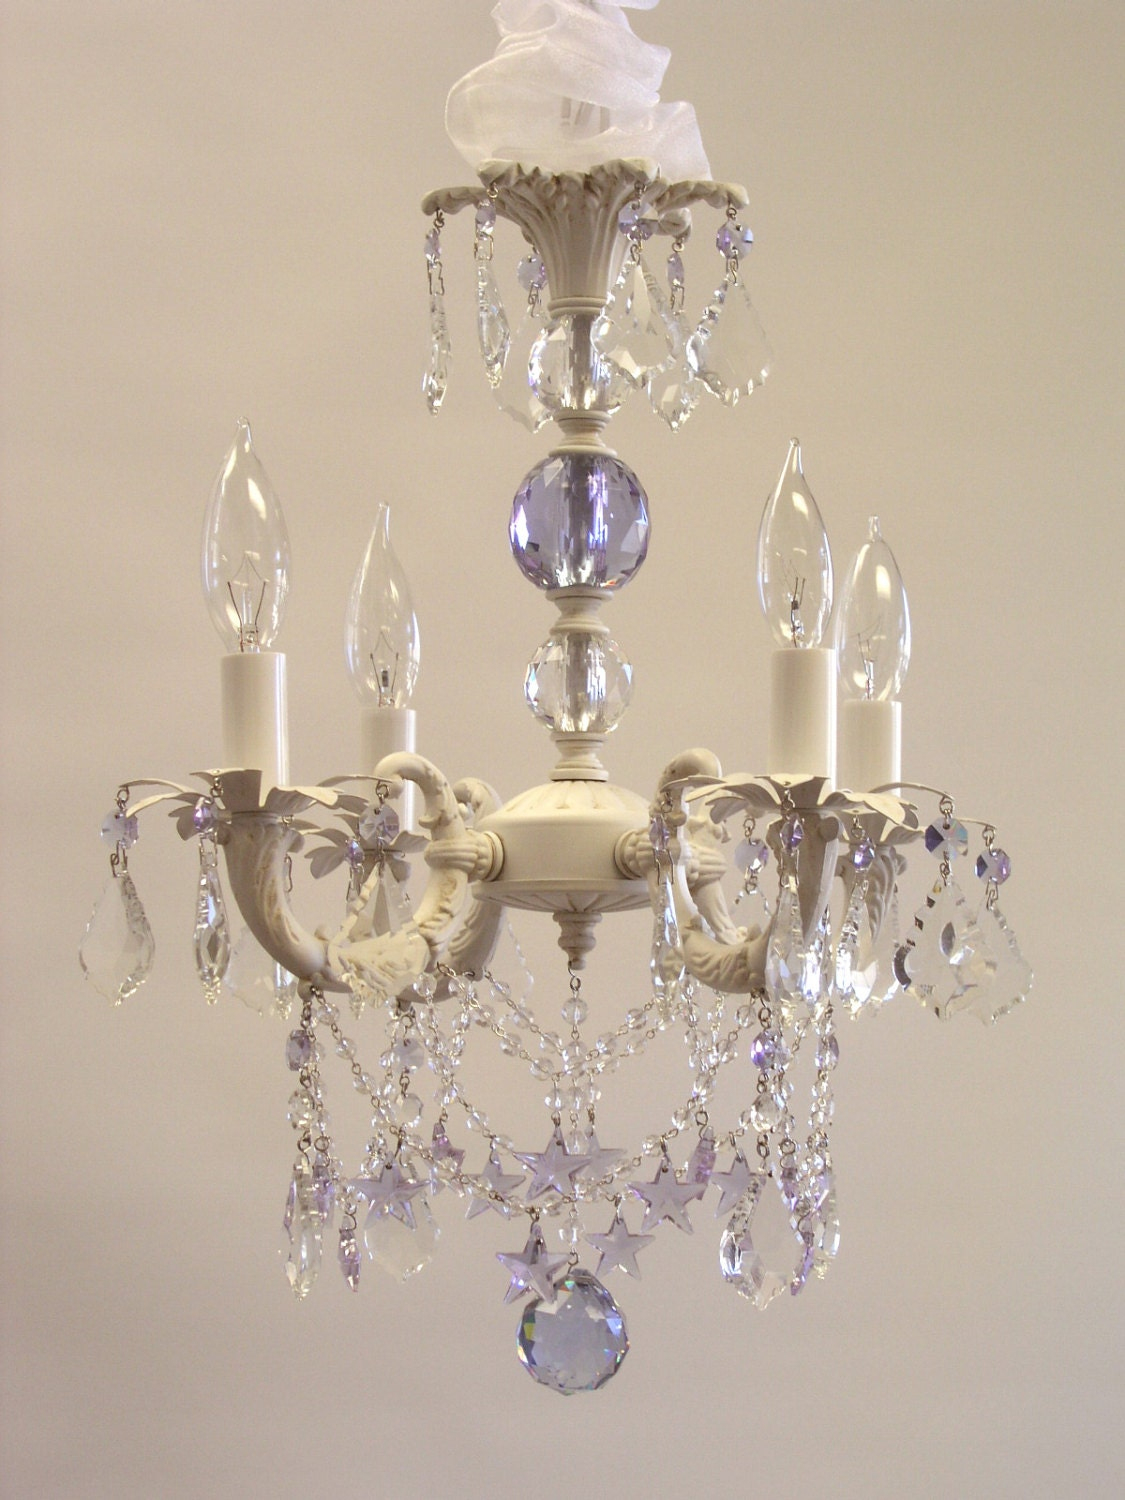 Shabby Chic Cottage Style Mini Chandelier Sugar avec Shabby Chic Chandeliers